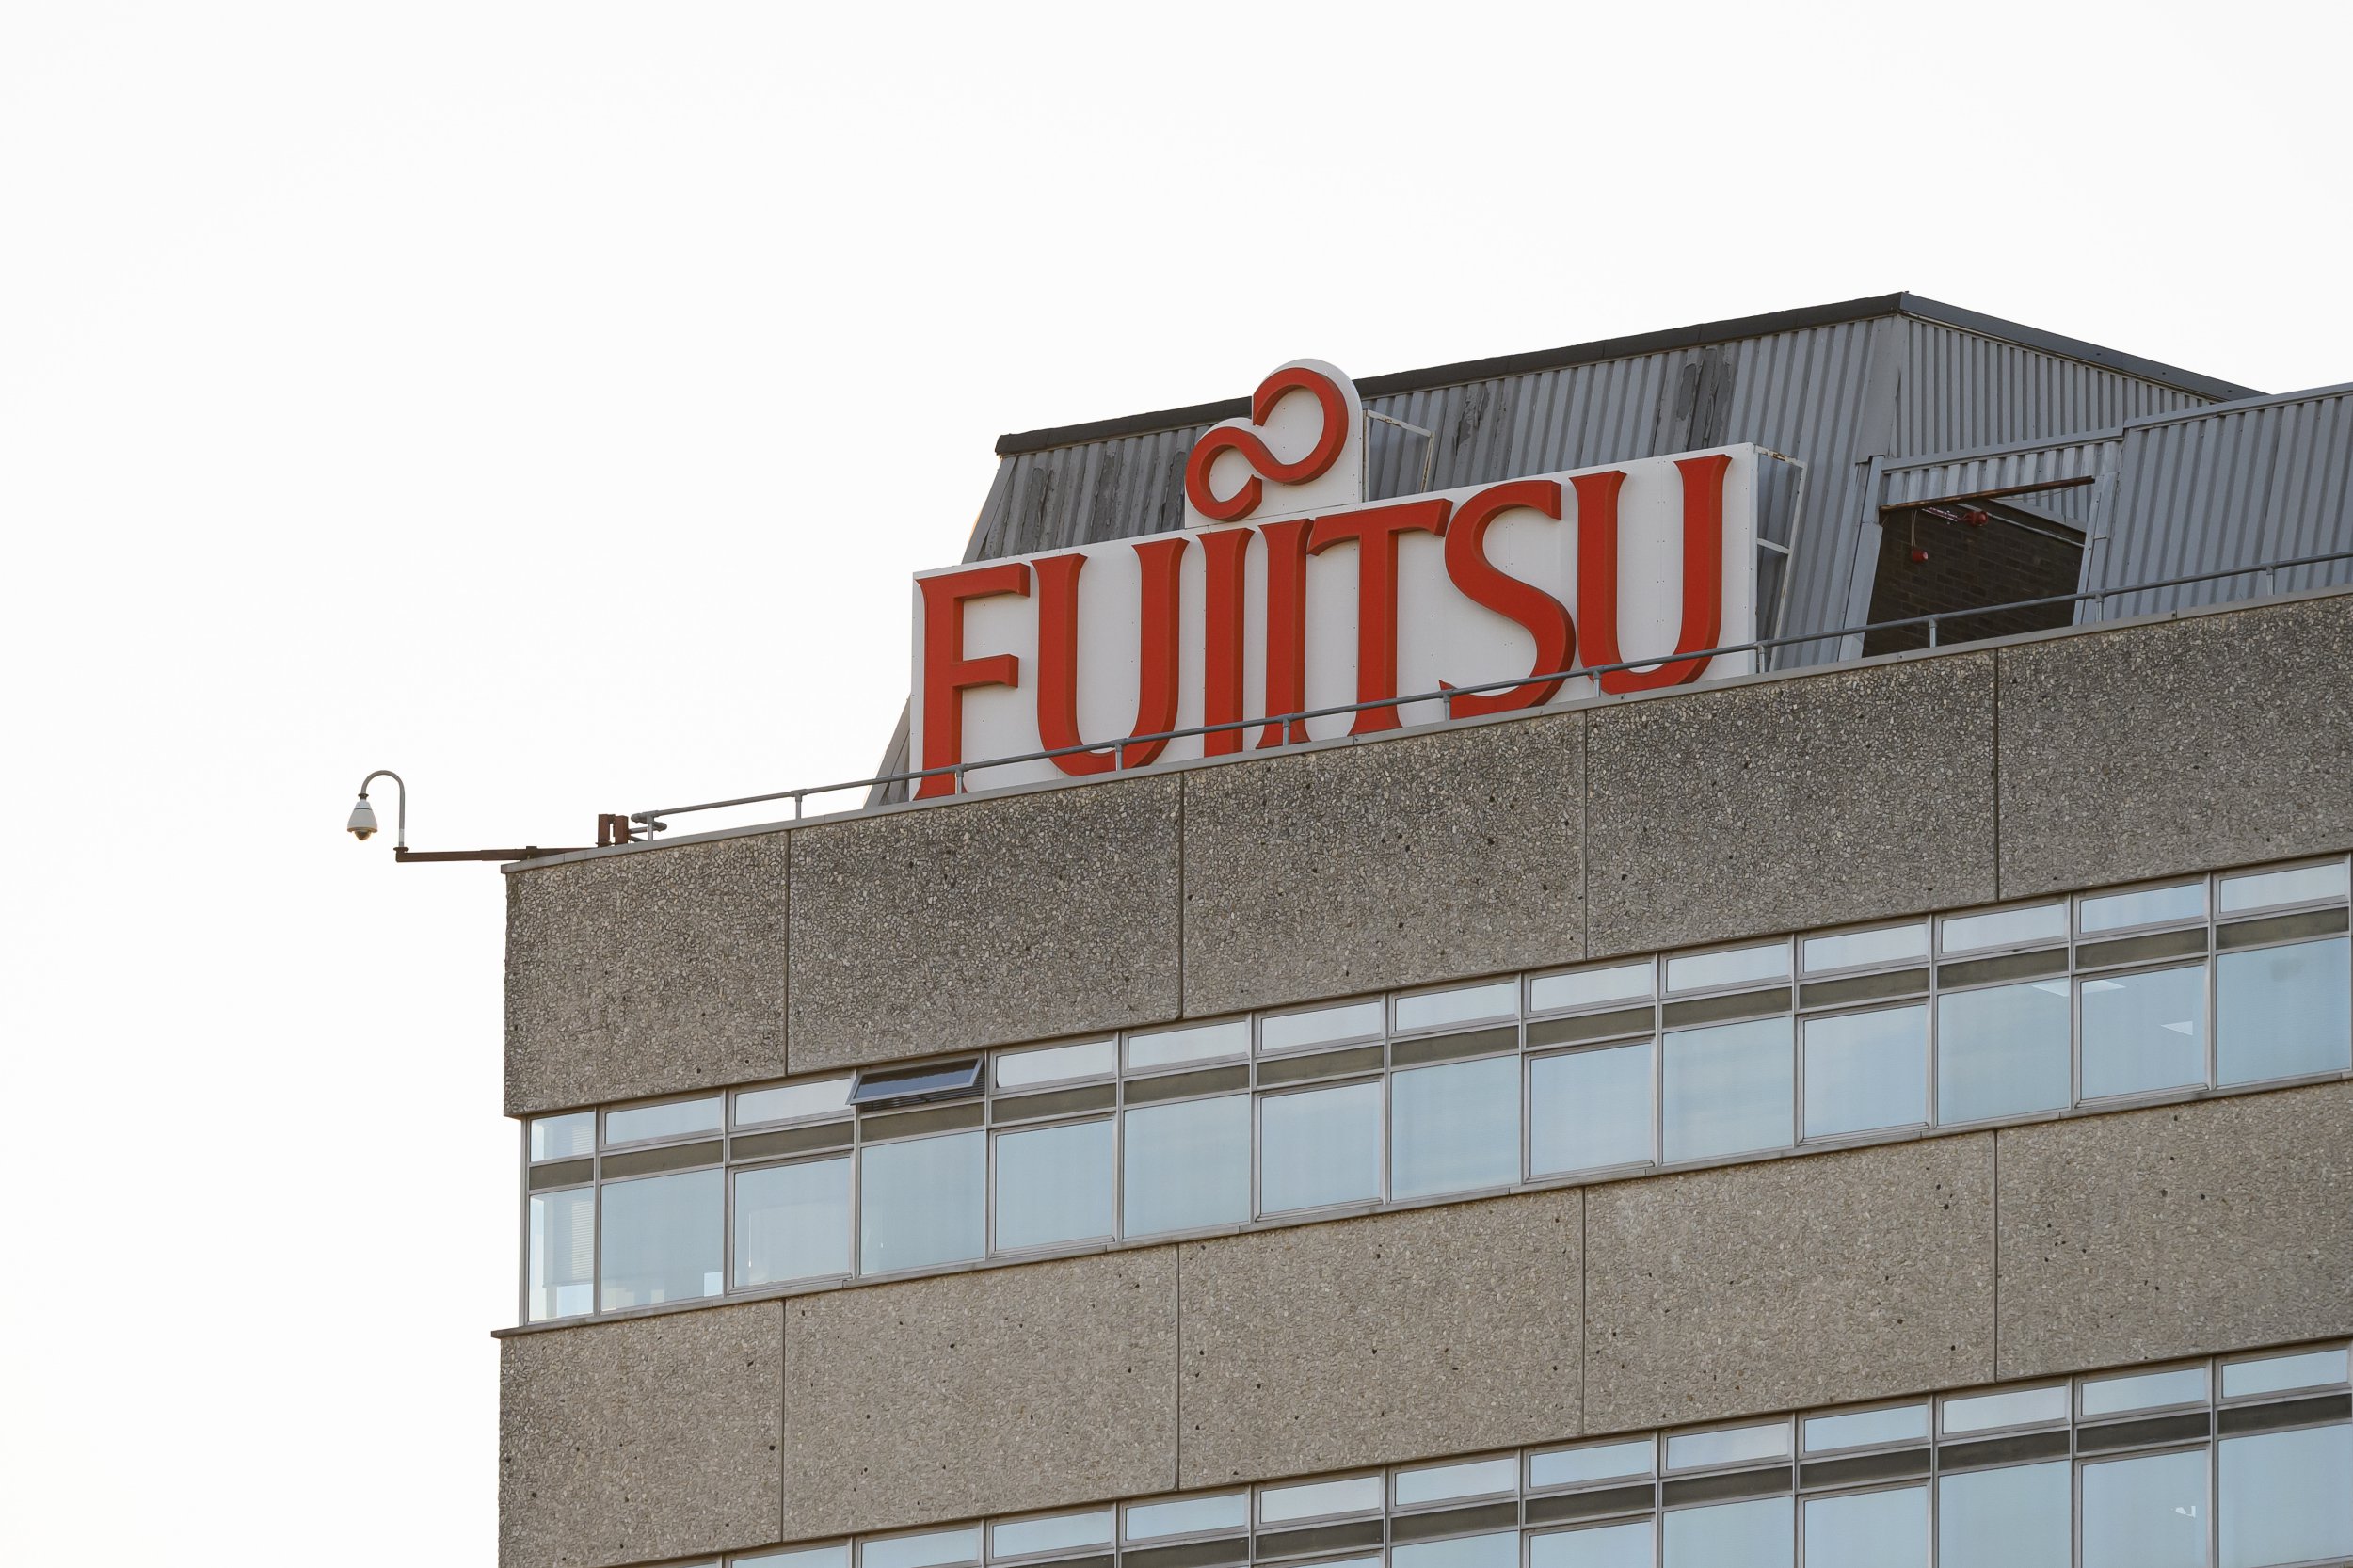 fujitsu has taxpayer-funded official to help it secure government contracts